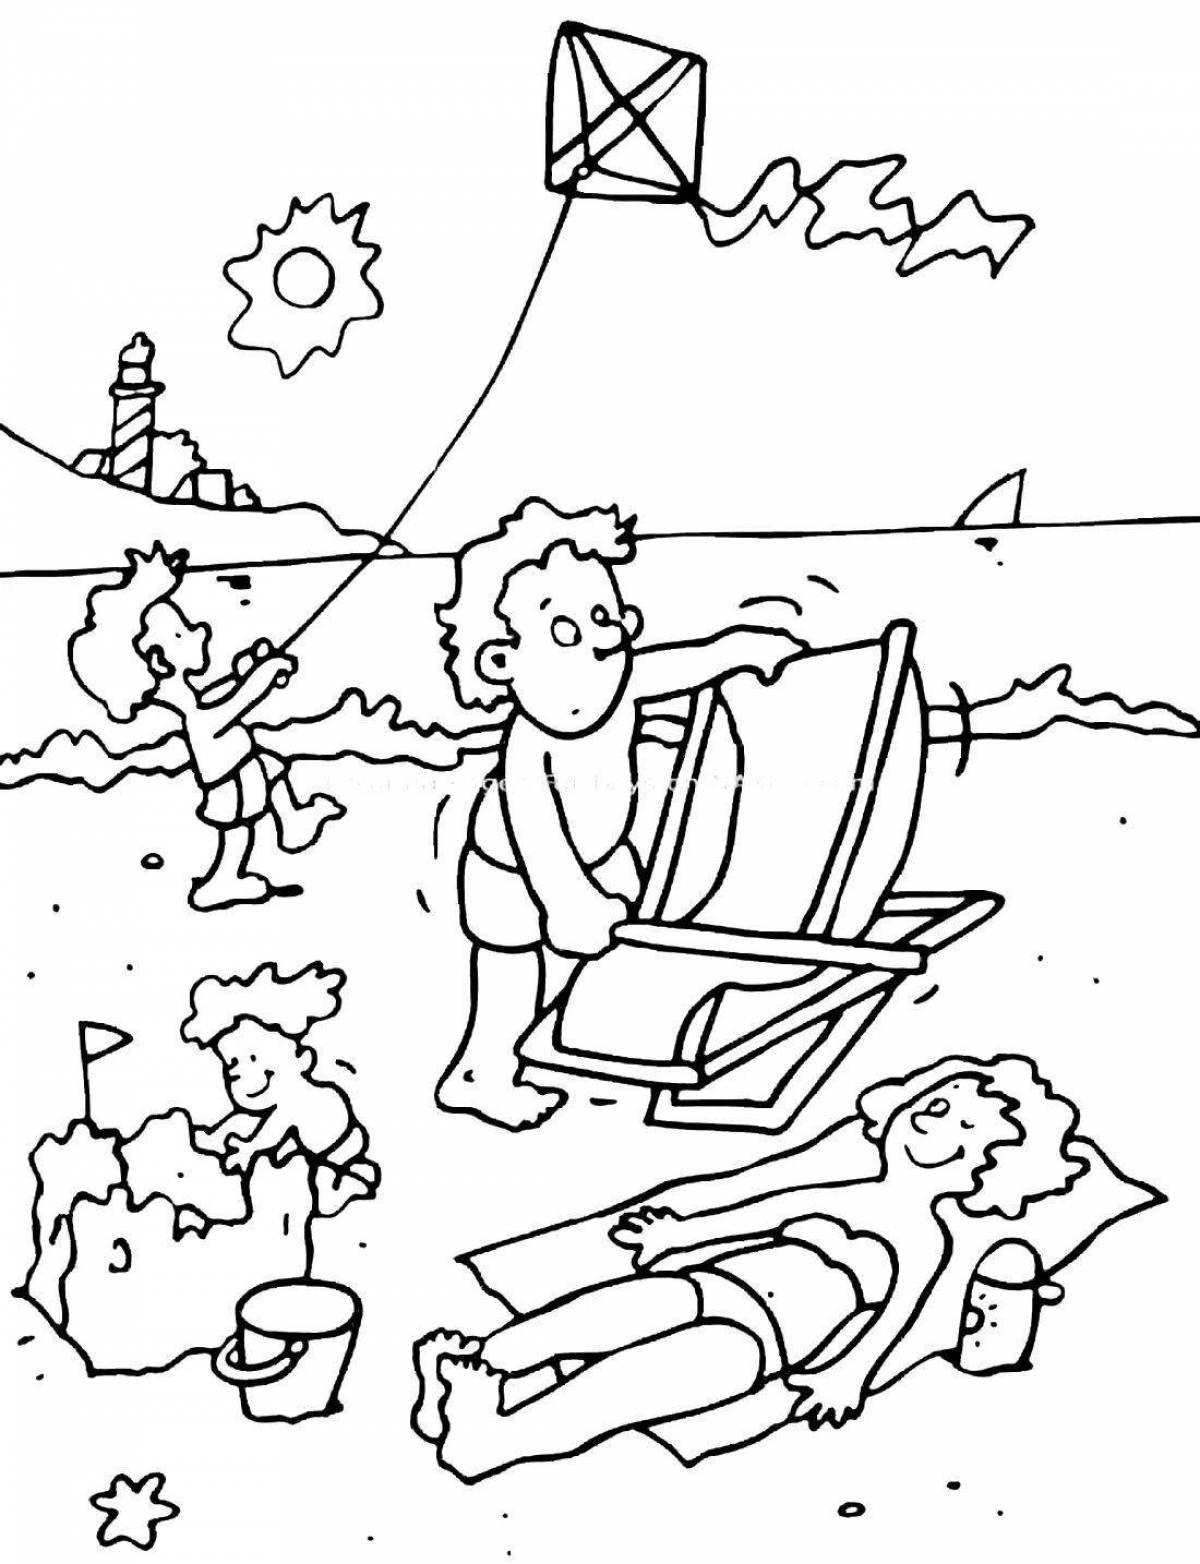 Colorful resort coloring page